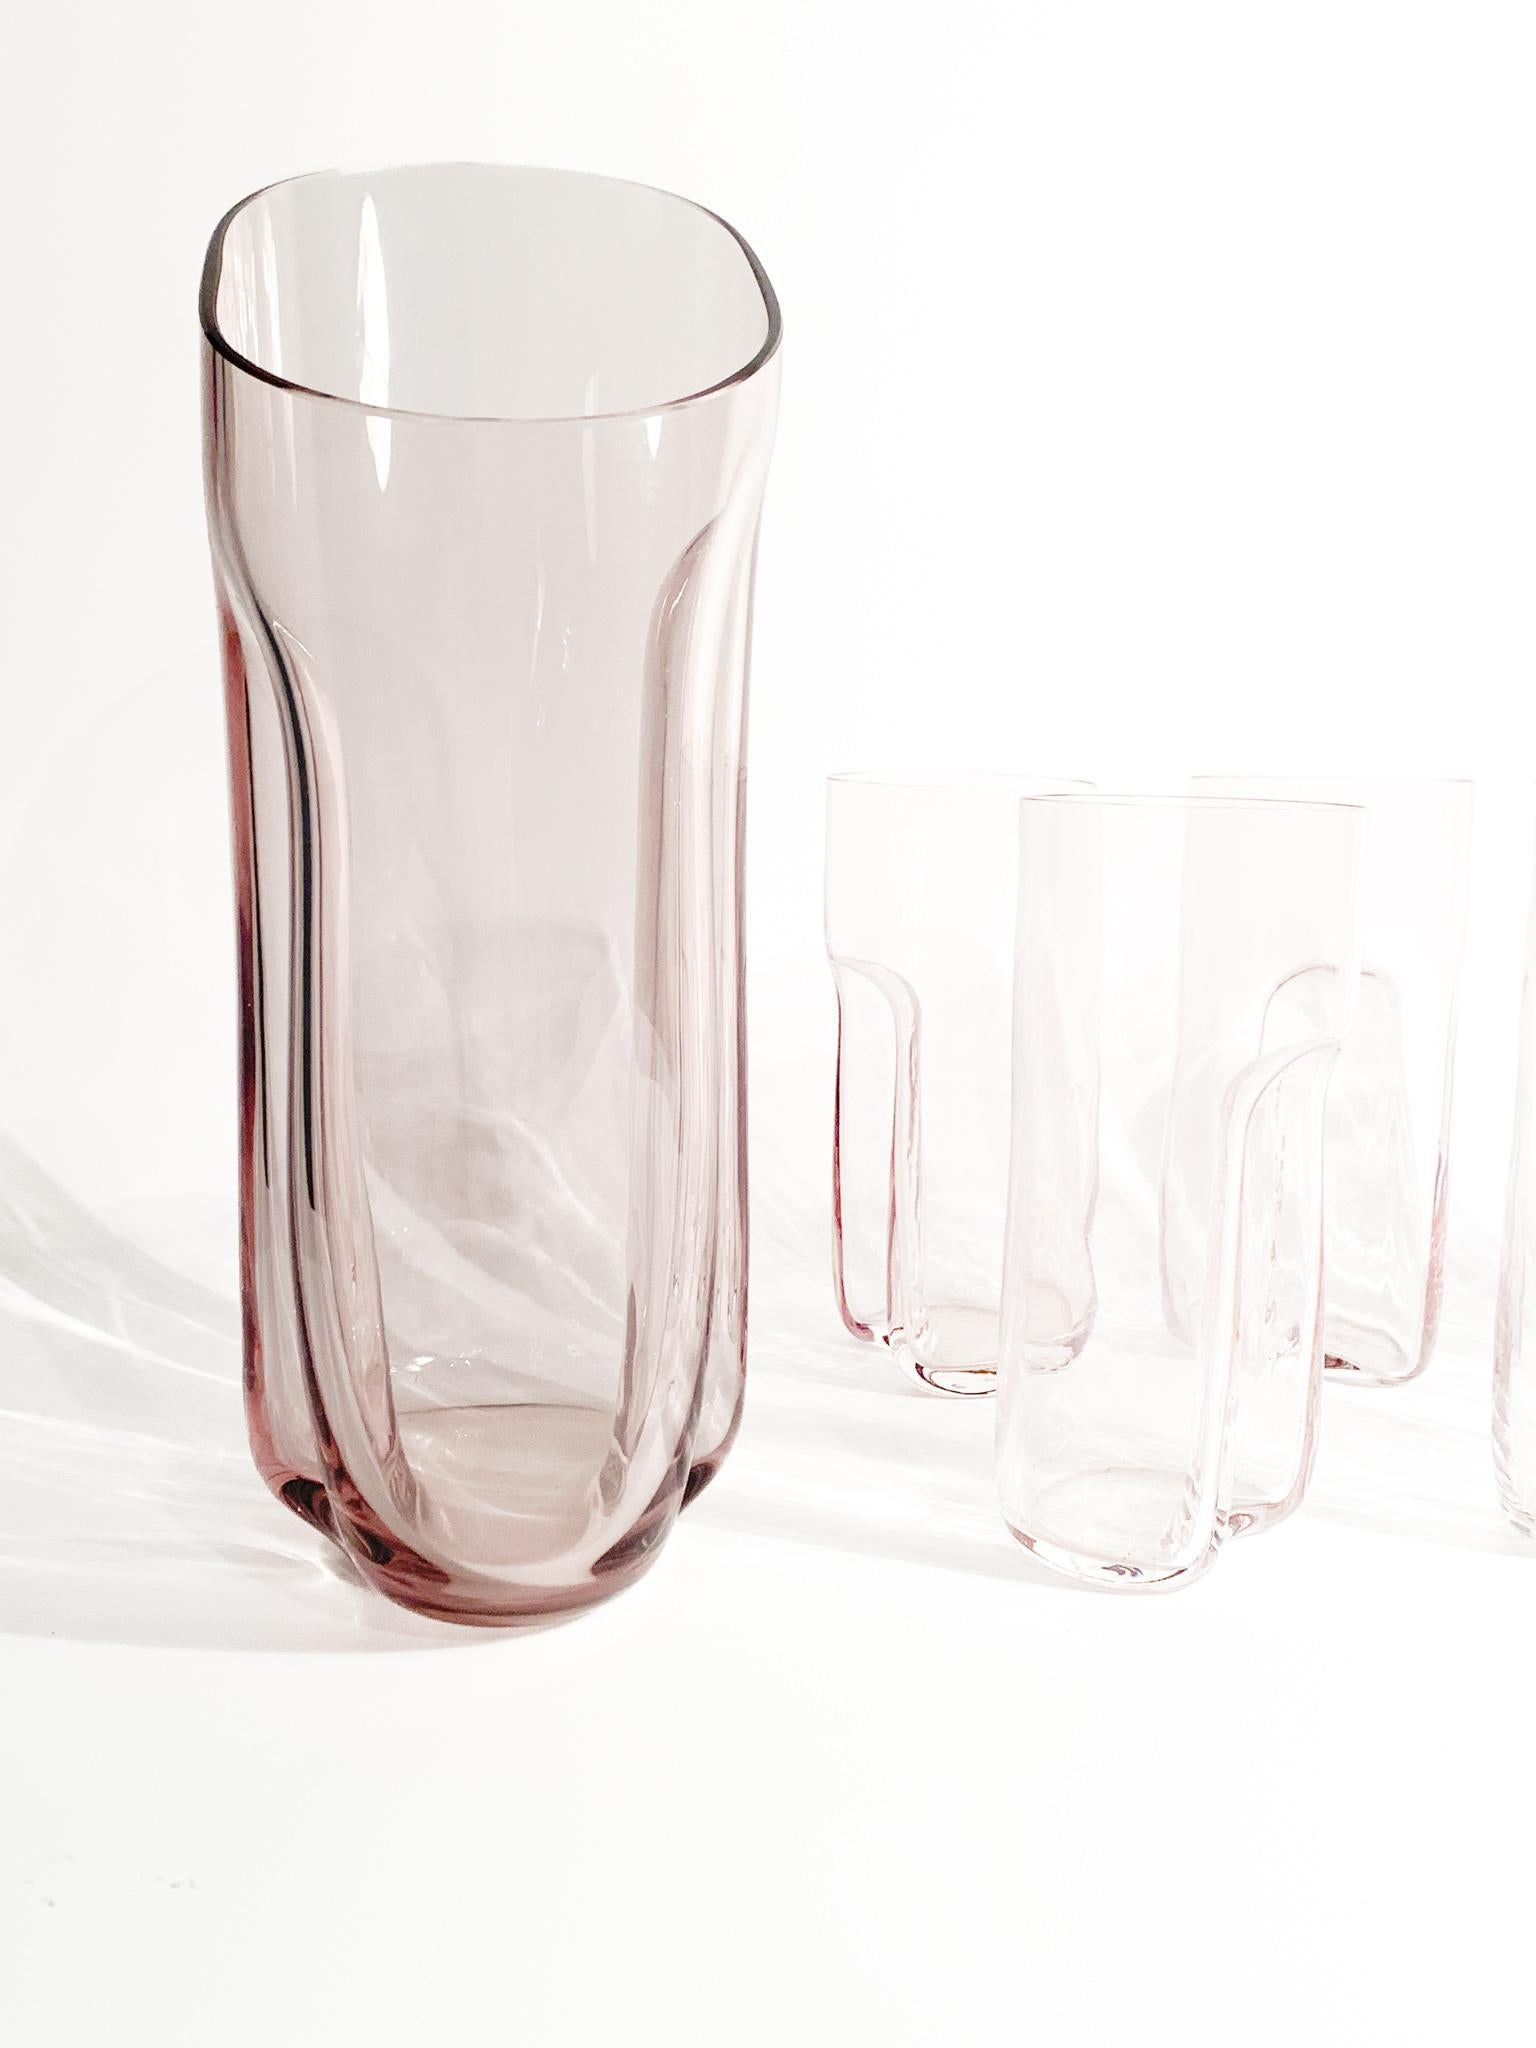 Set of Six Glasses and Carafe in Murano Glass by Cenedese and Albarelli 1970s For Sale 4